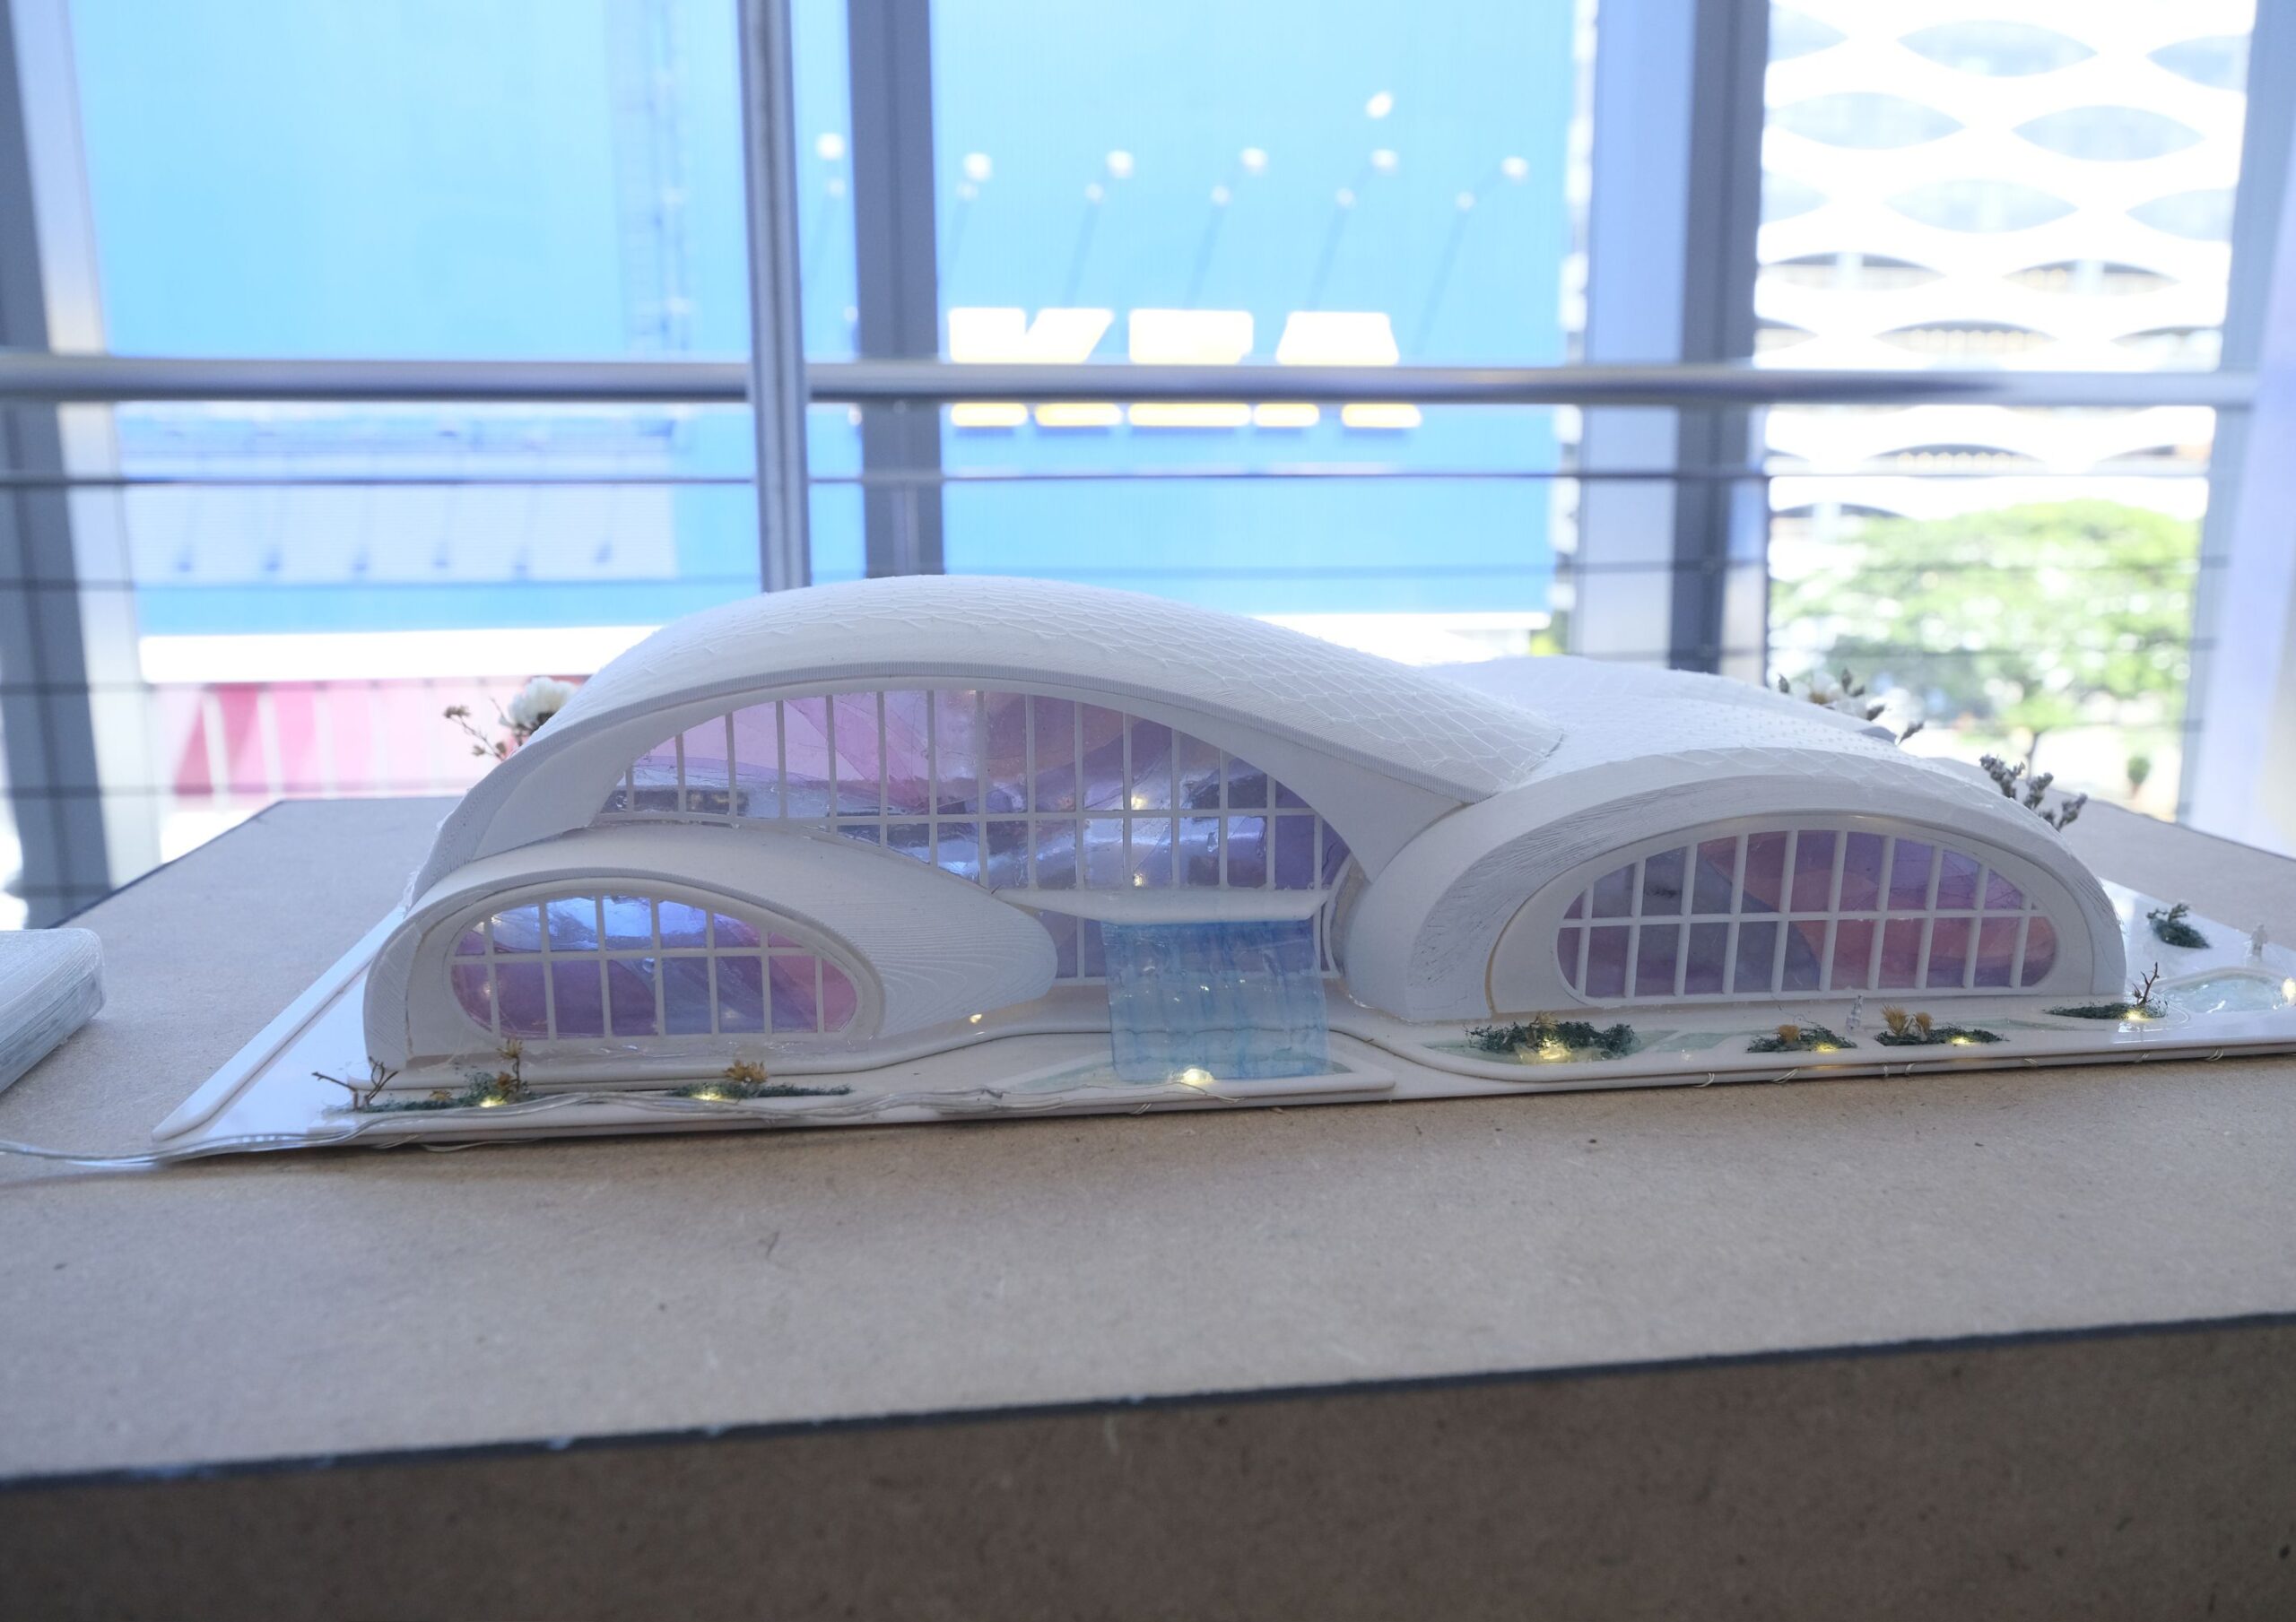 Entries from Projecto Design Competition at WorldBex 2024 at the SMX Convention Center.